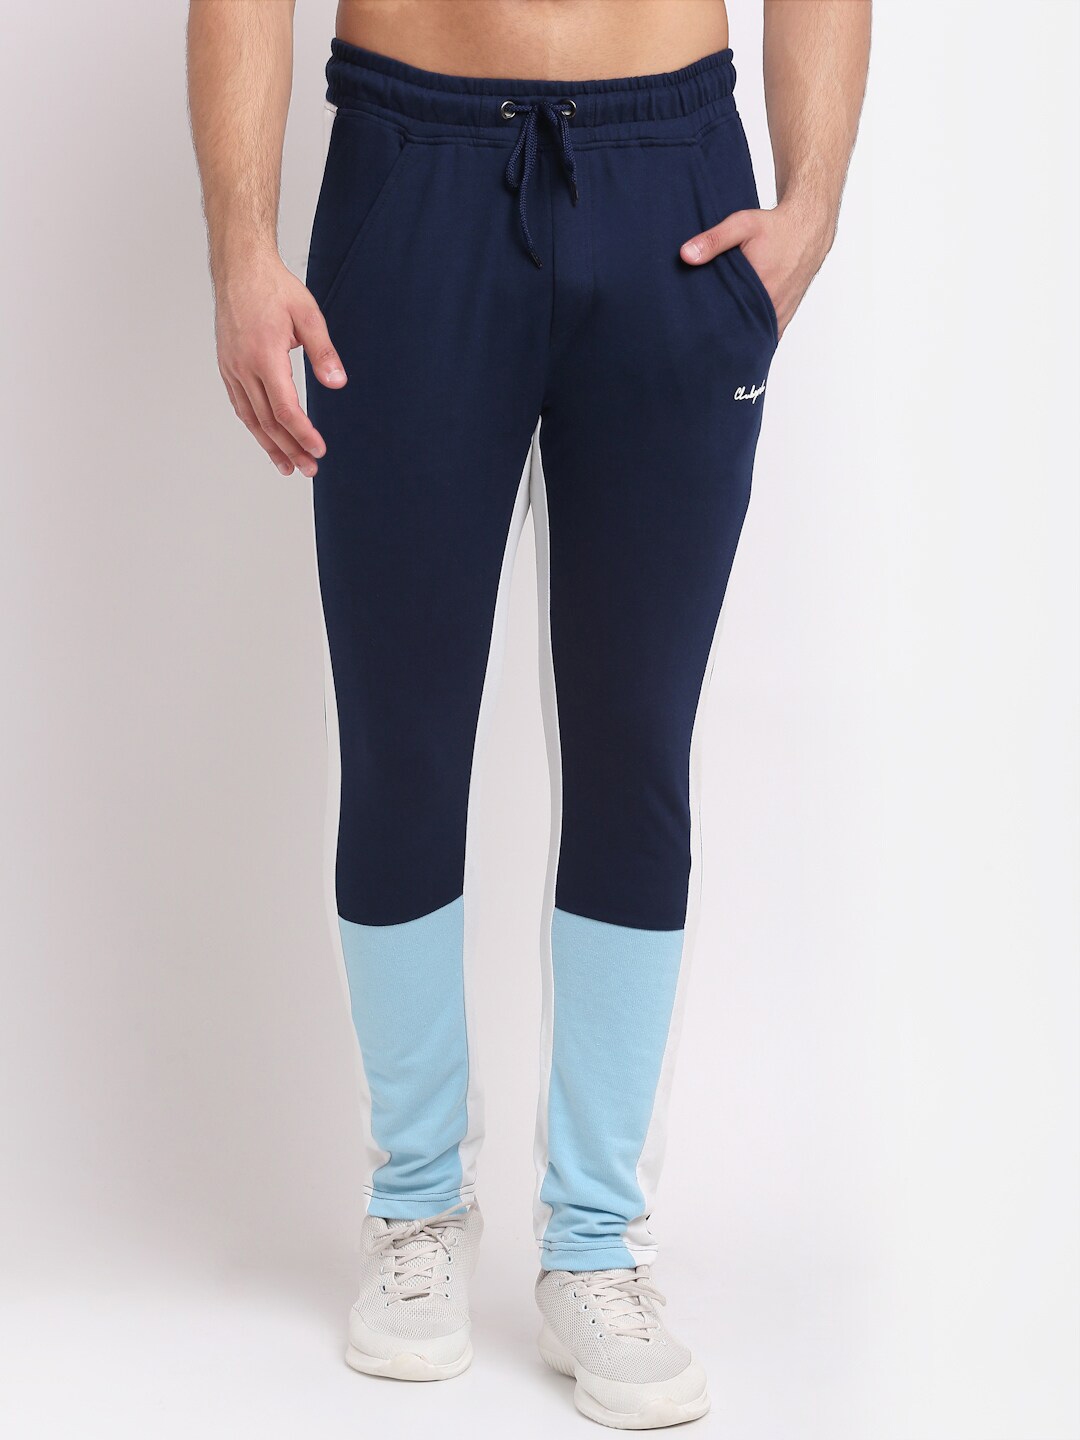 Assorted Brands Solid Navy Blue Yoga Pants Size XL - 63% off